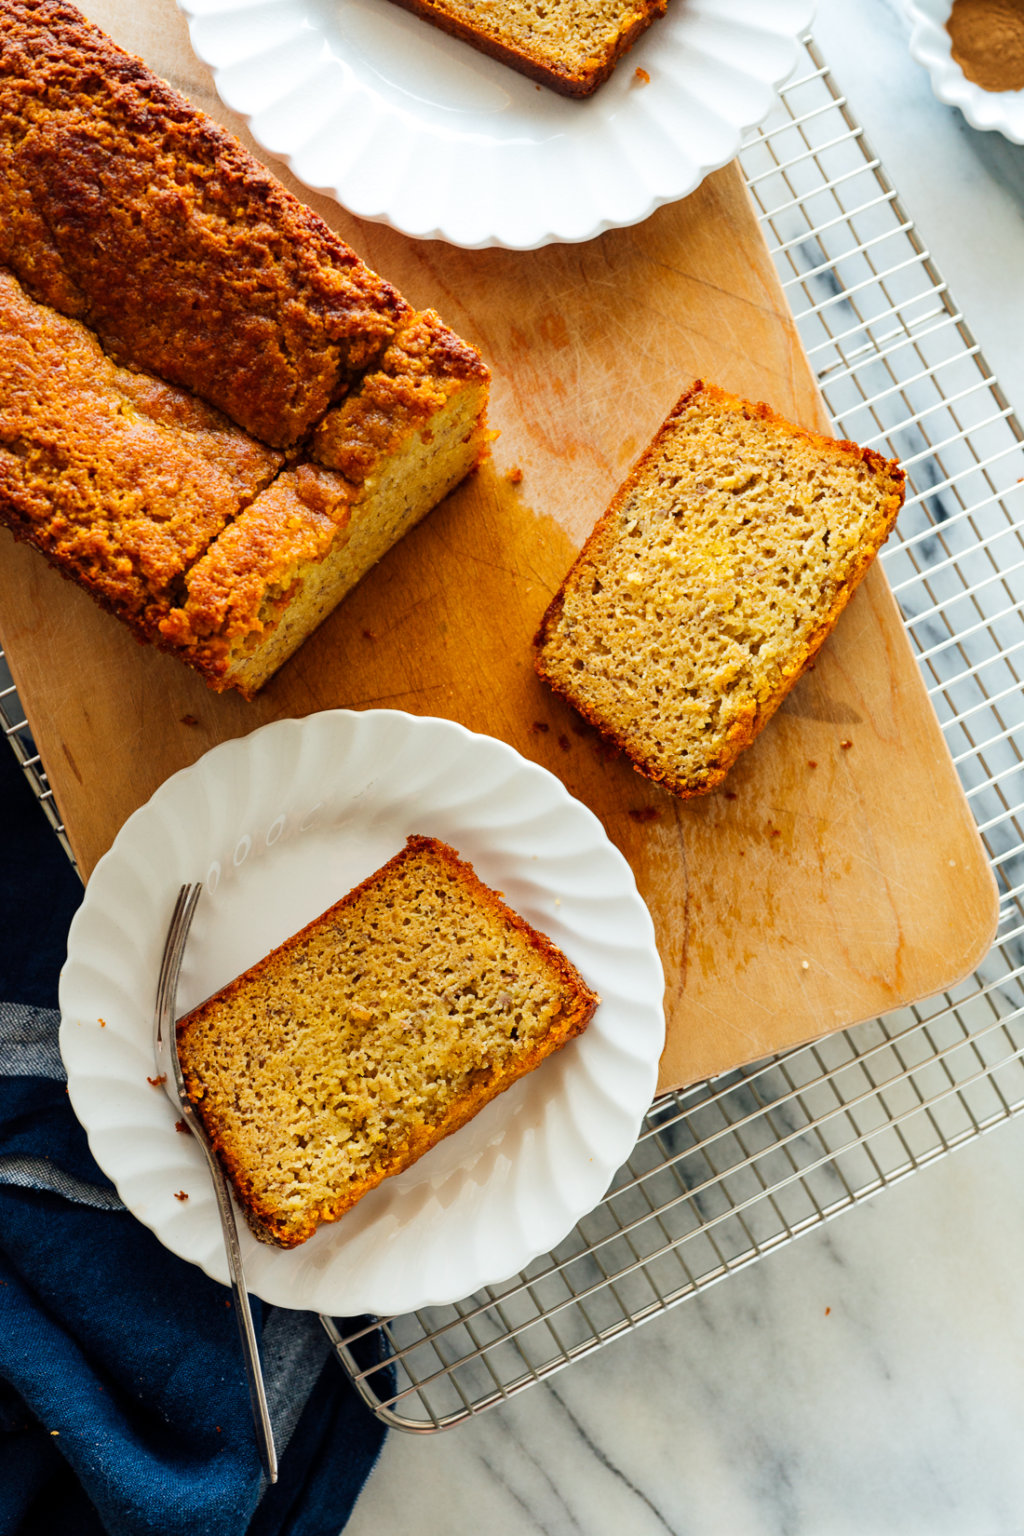 Gluten-Free Banana Bread Recipe (with Almond Flour) - Cookie and Kate